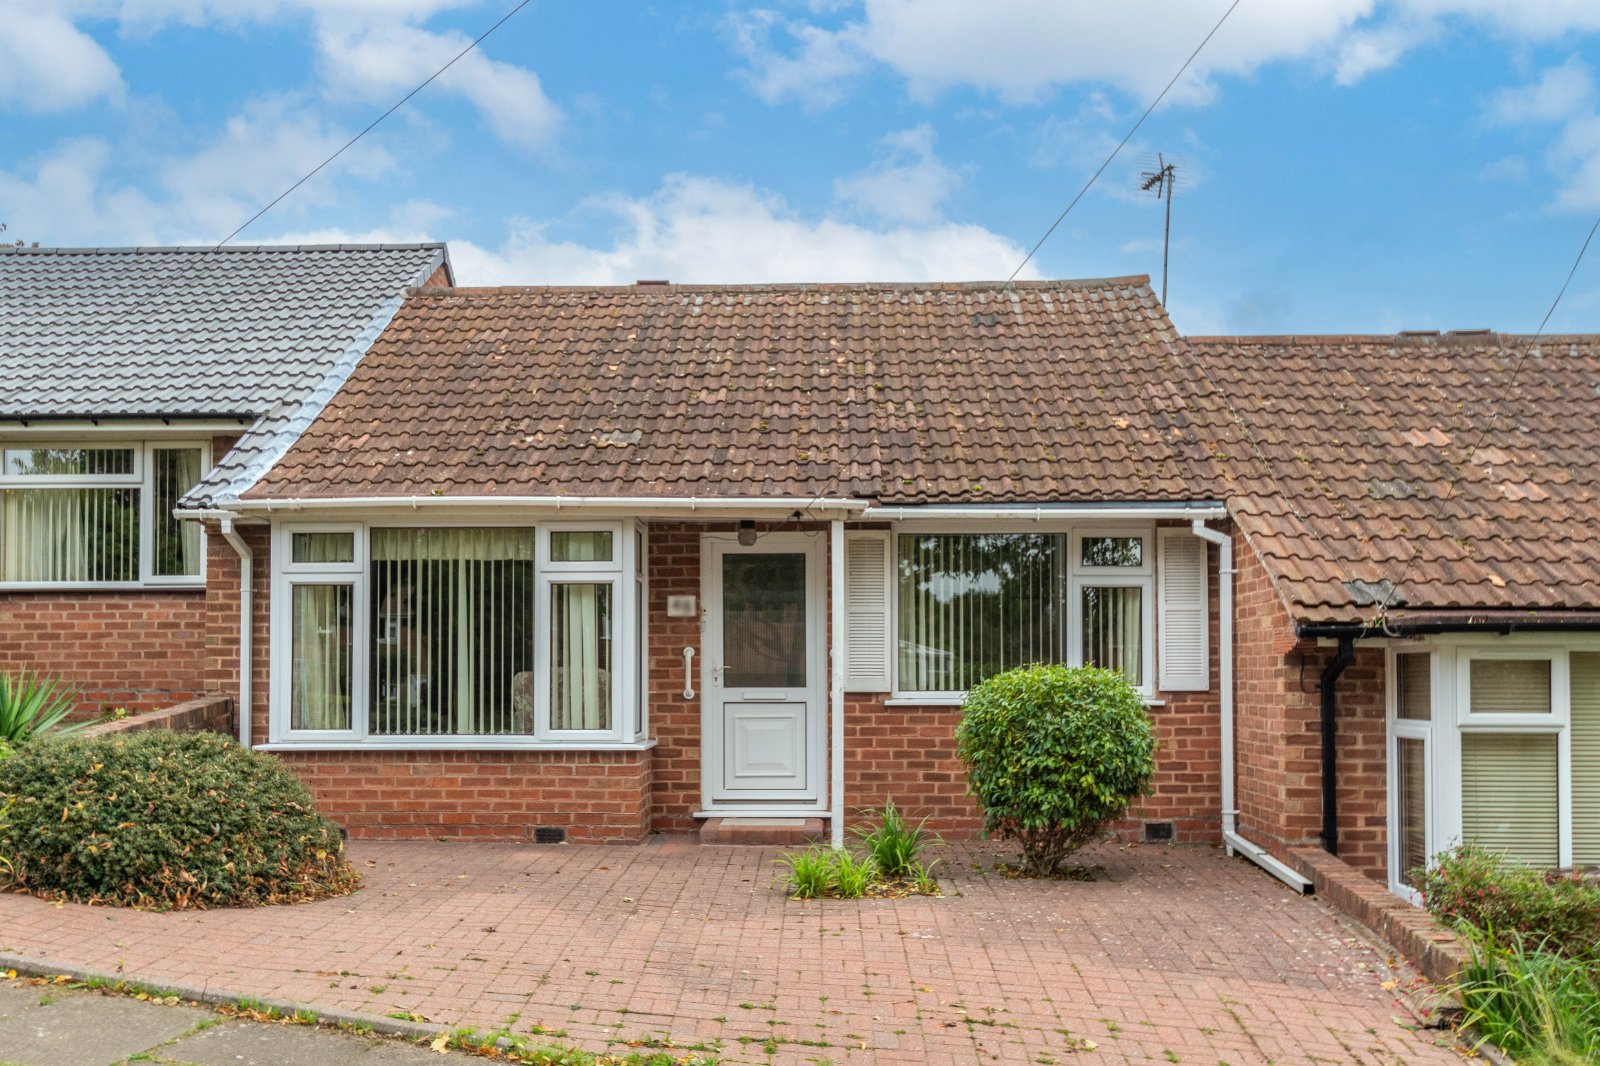 2 bed bungalow for sale in Long Leasow, Birmingham  - Property Image 1